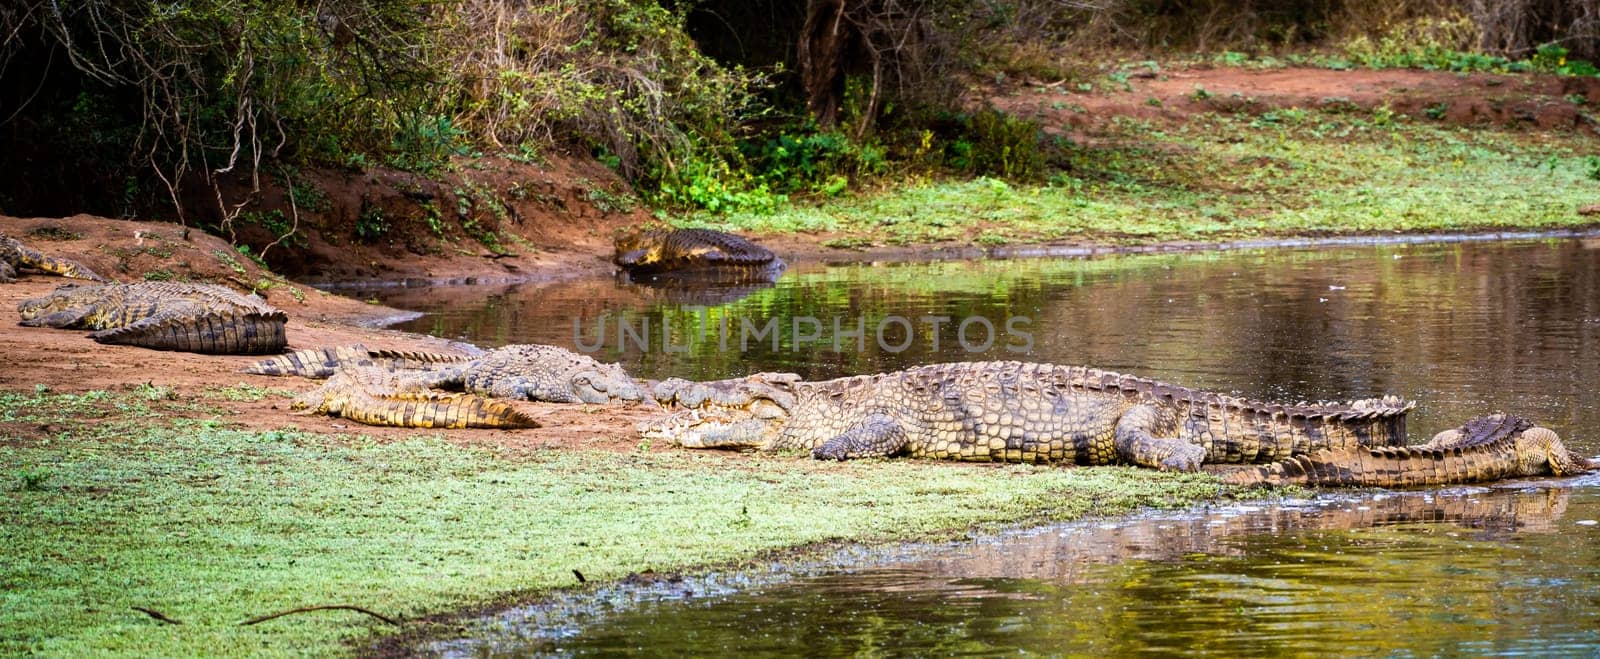 Wild Crocodile close ups in Kruger National Park, South Africa. High quality photo